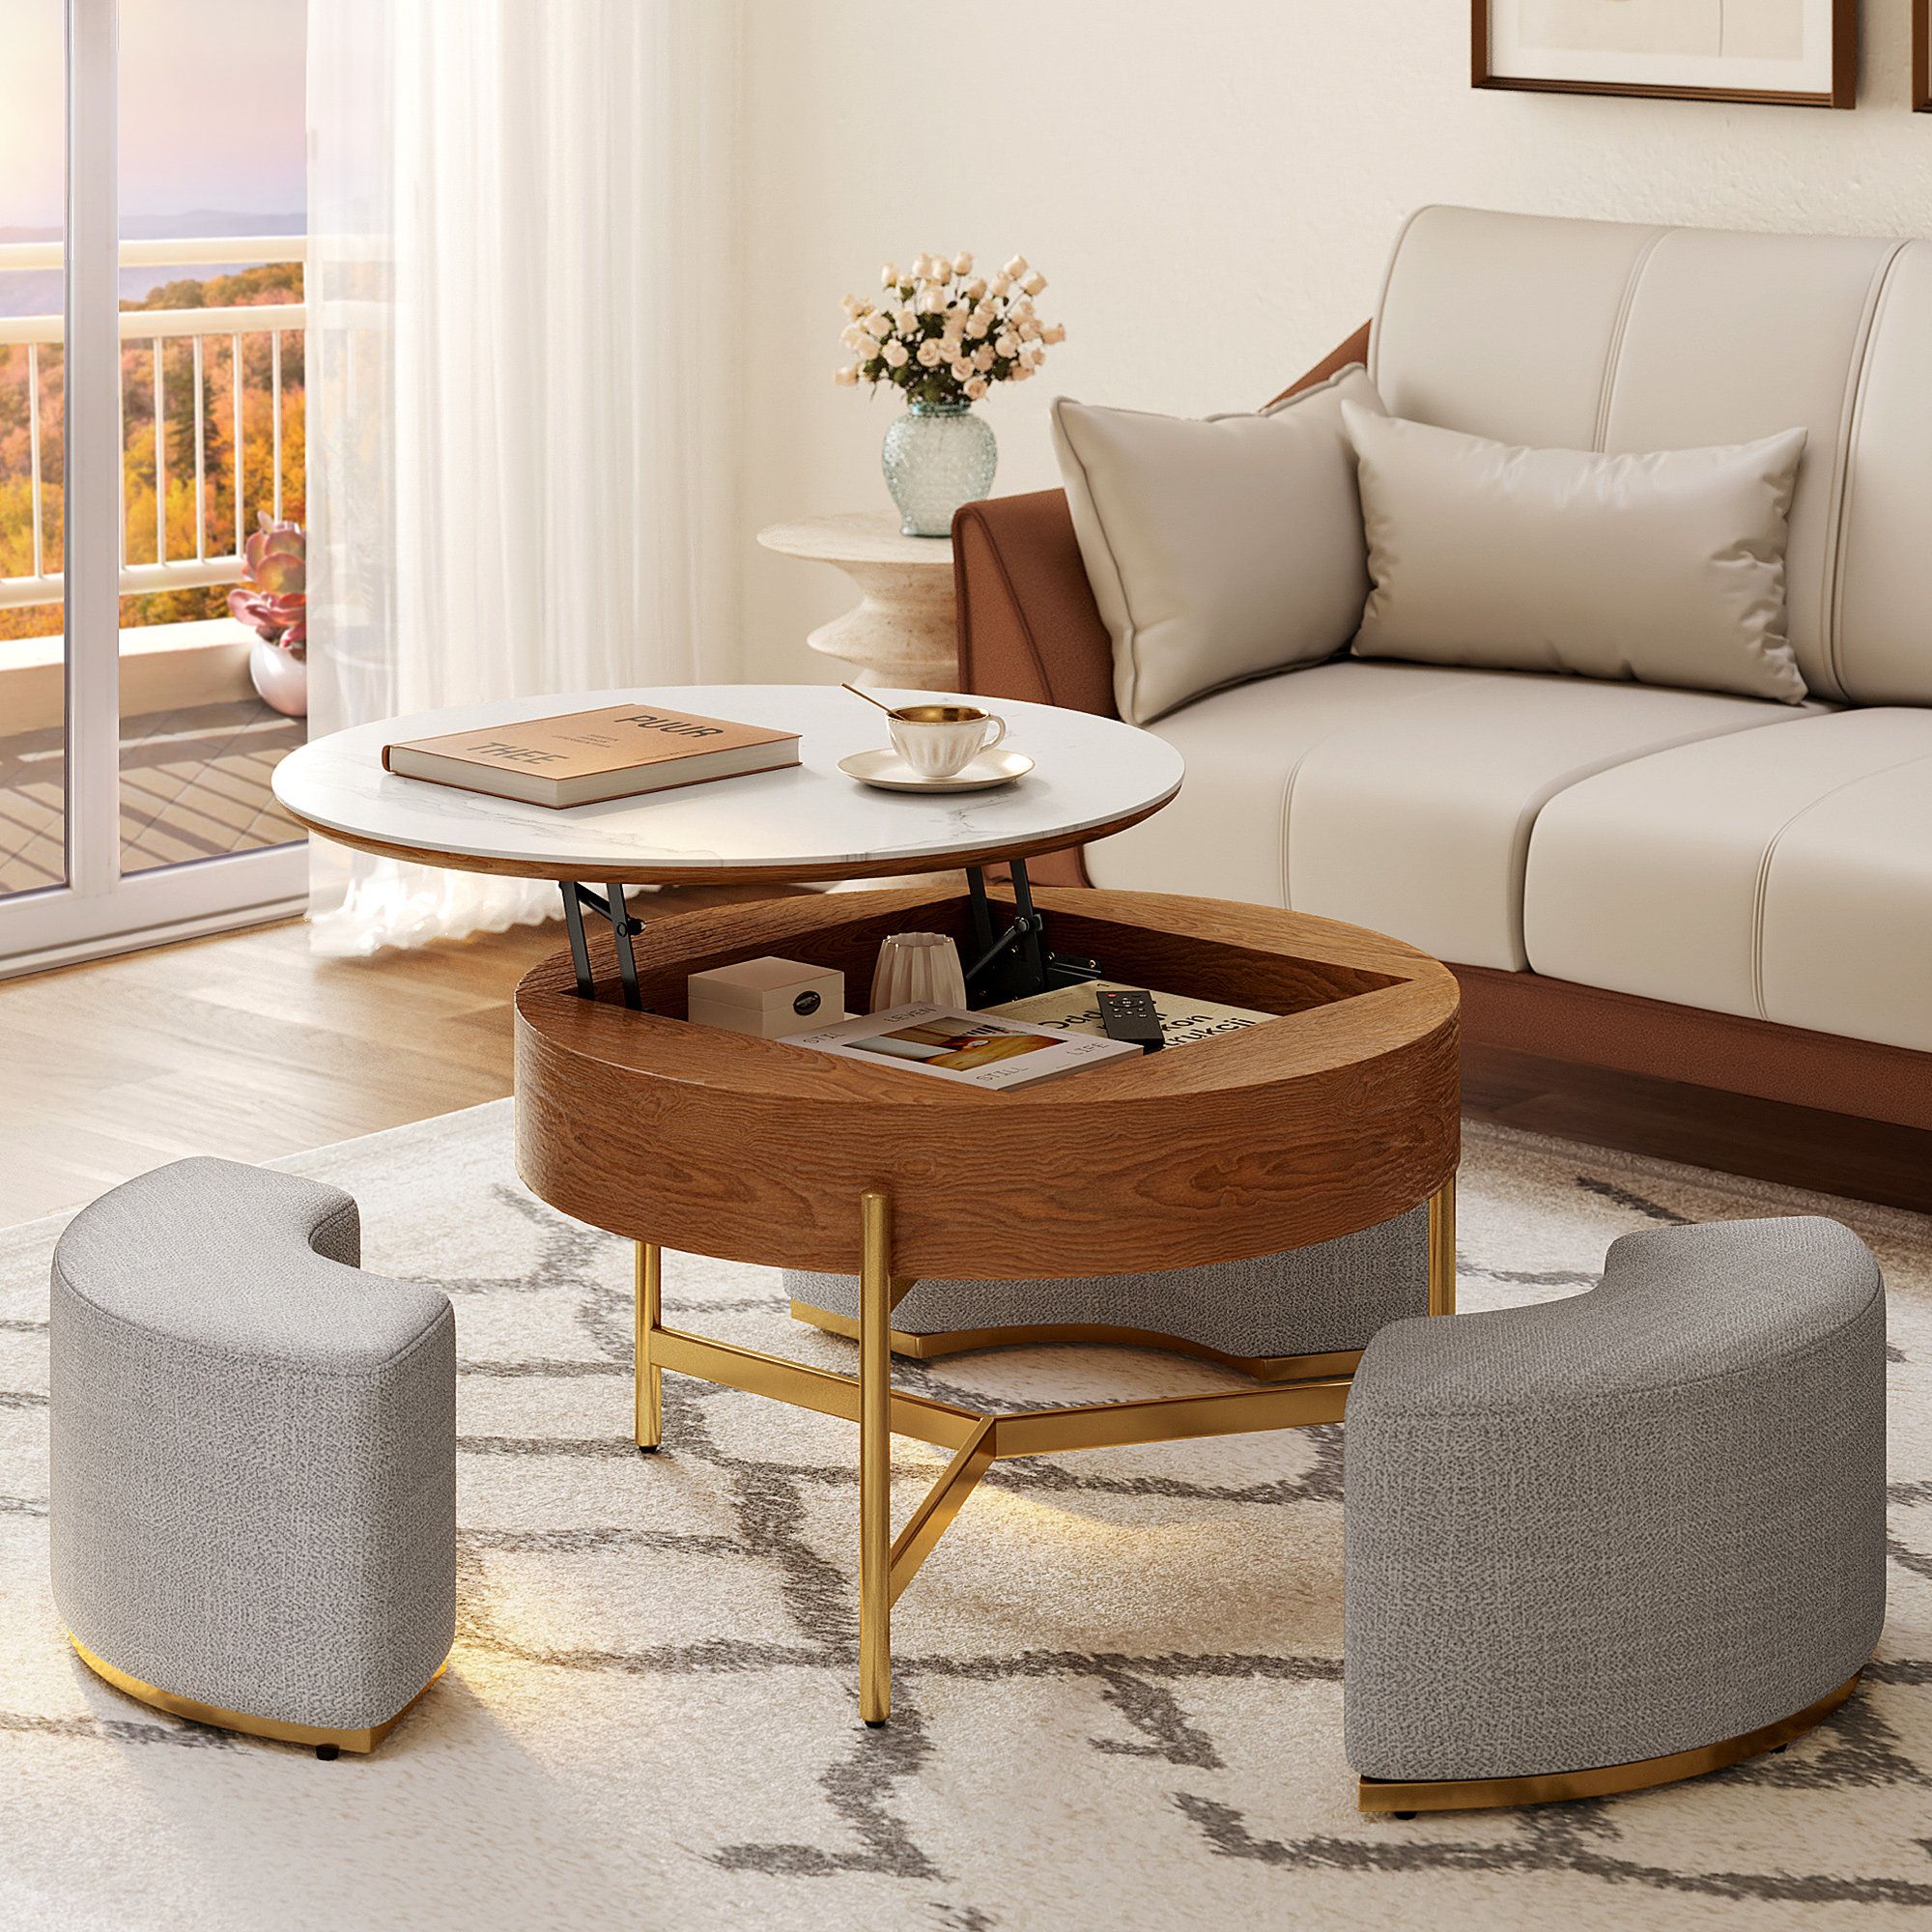 Everly Quinn Sohad Lift Top Extendable Frame Coffee Table With Storage &  Reviews | Wayfair For Lift Top Coffee Tables With Shelves (Photo 4 of 15)